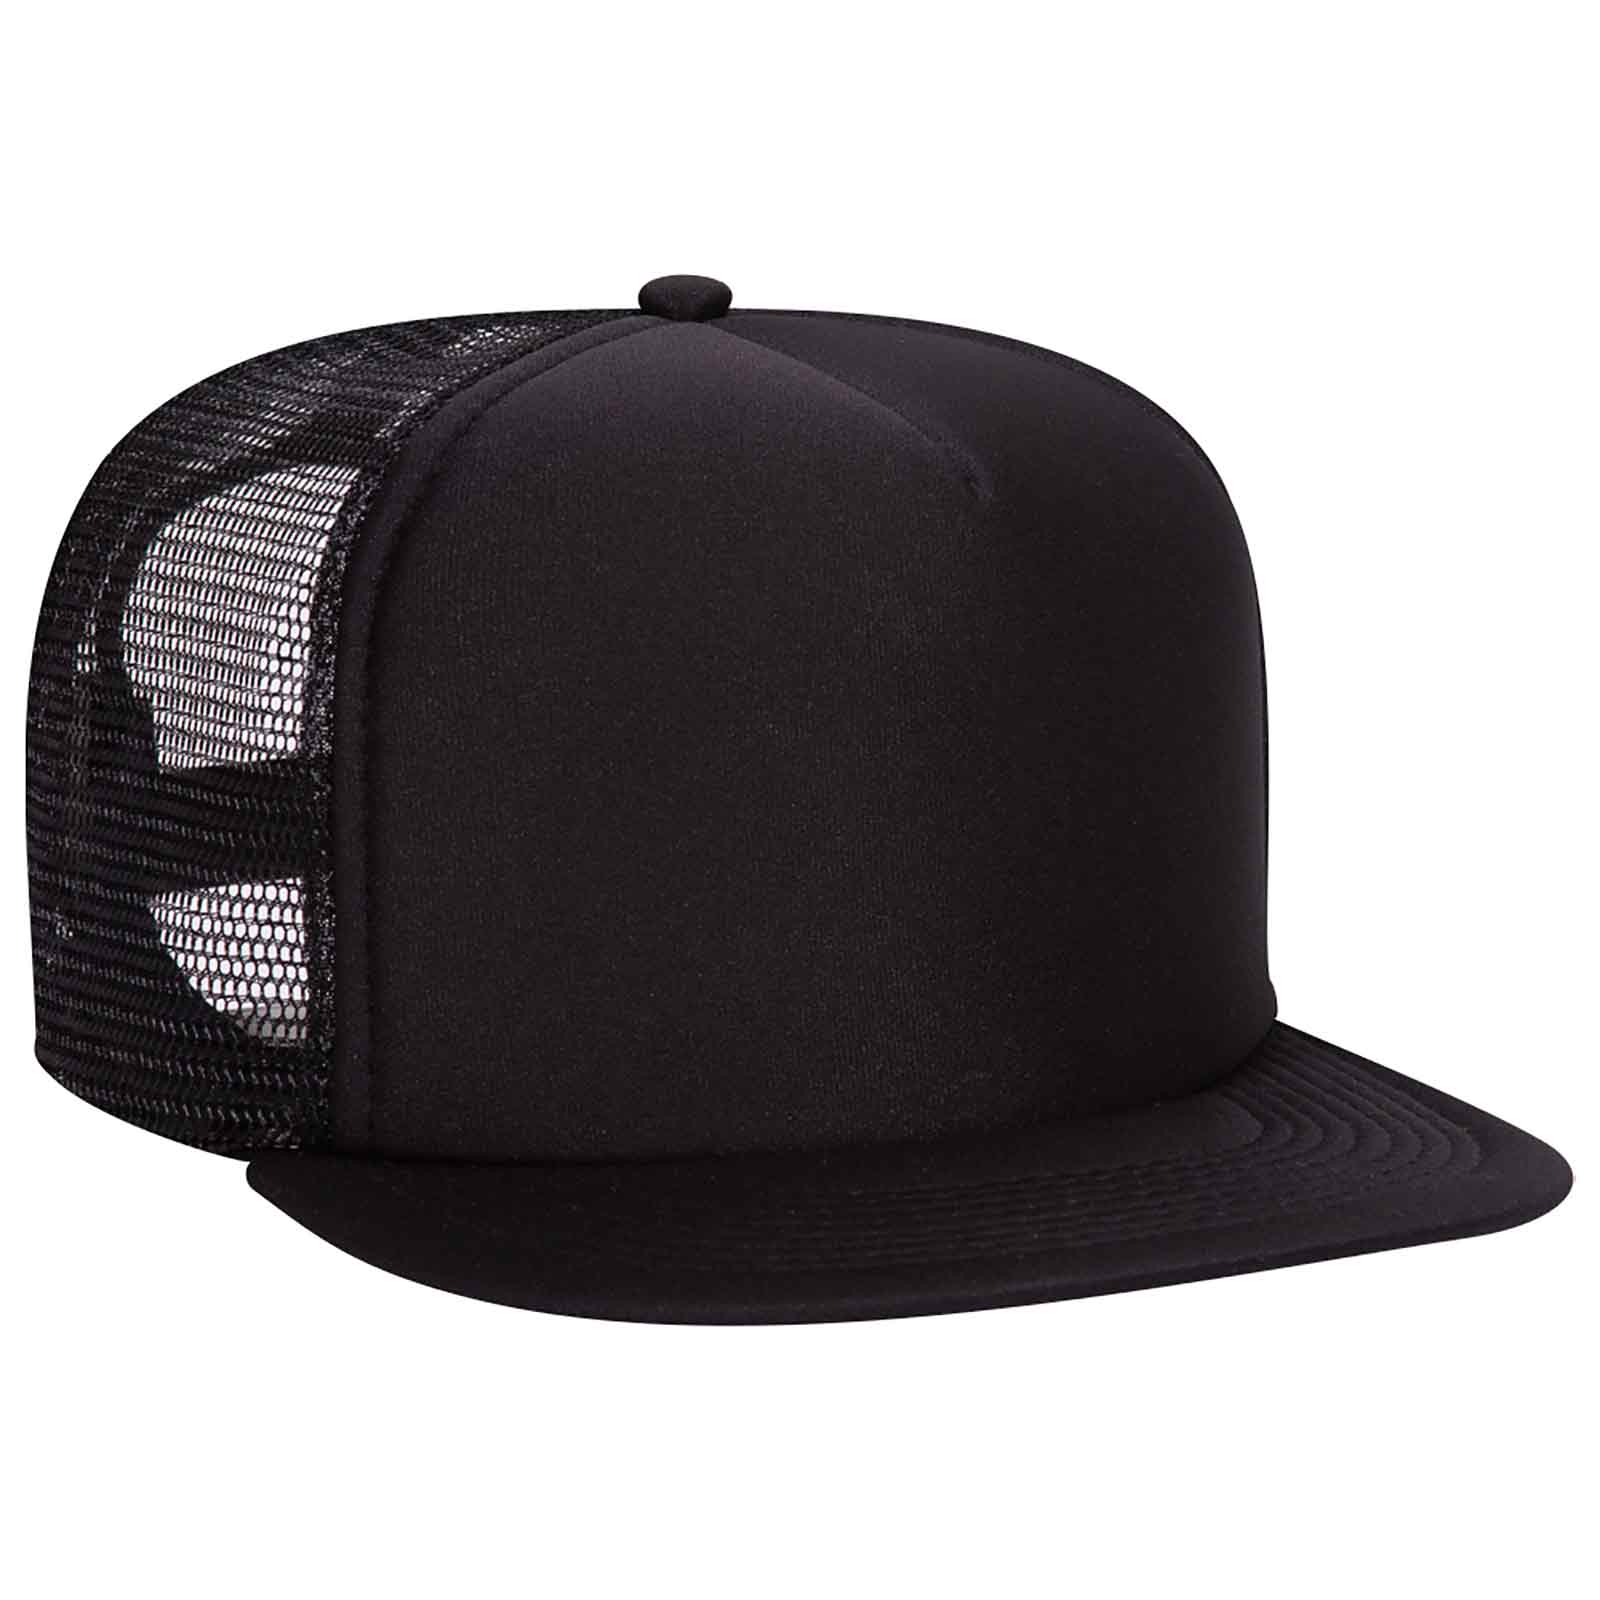 High Crown Snapback Baseball Cap with Mesh Back - Perfect for Style and  Comfort